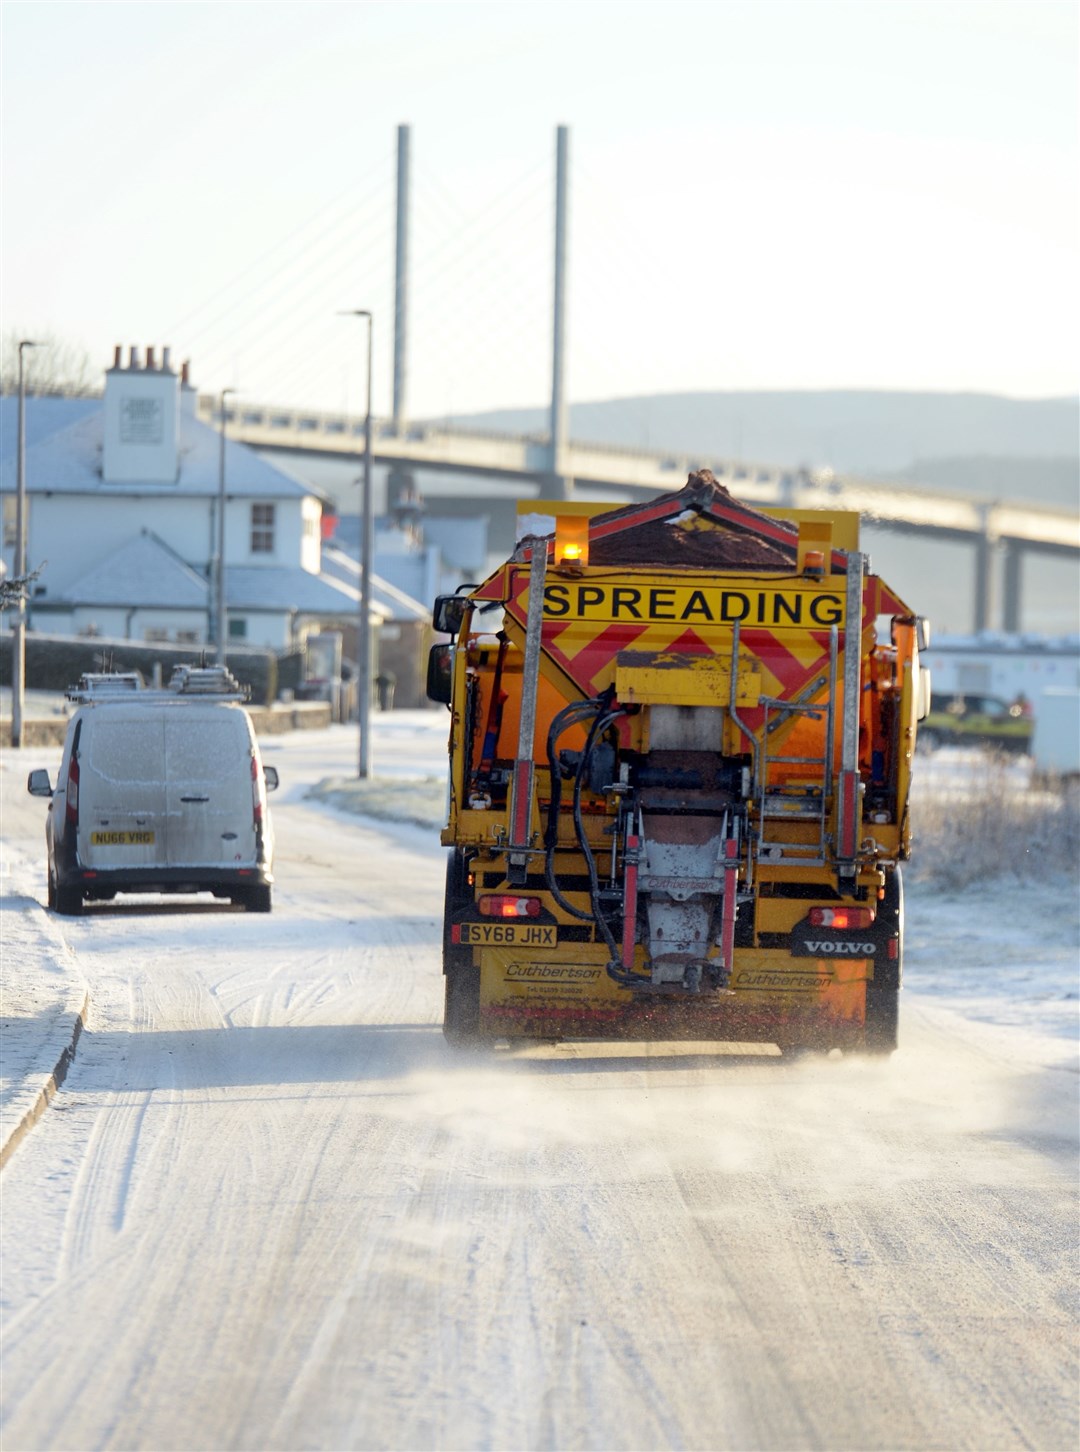 A rise in the temperature has eased the pressure for many after a challenging week on the roads that stopped thousands from getting to school. Some routes though as being treated still today.